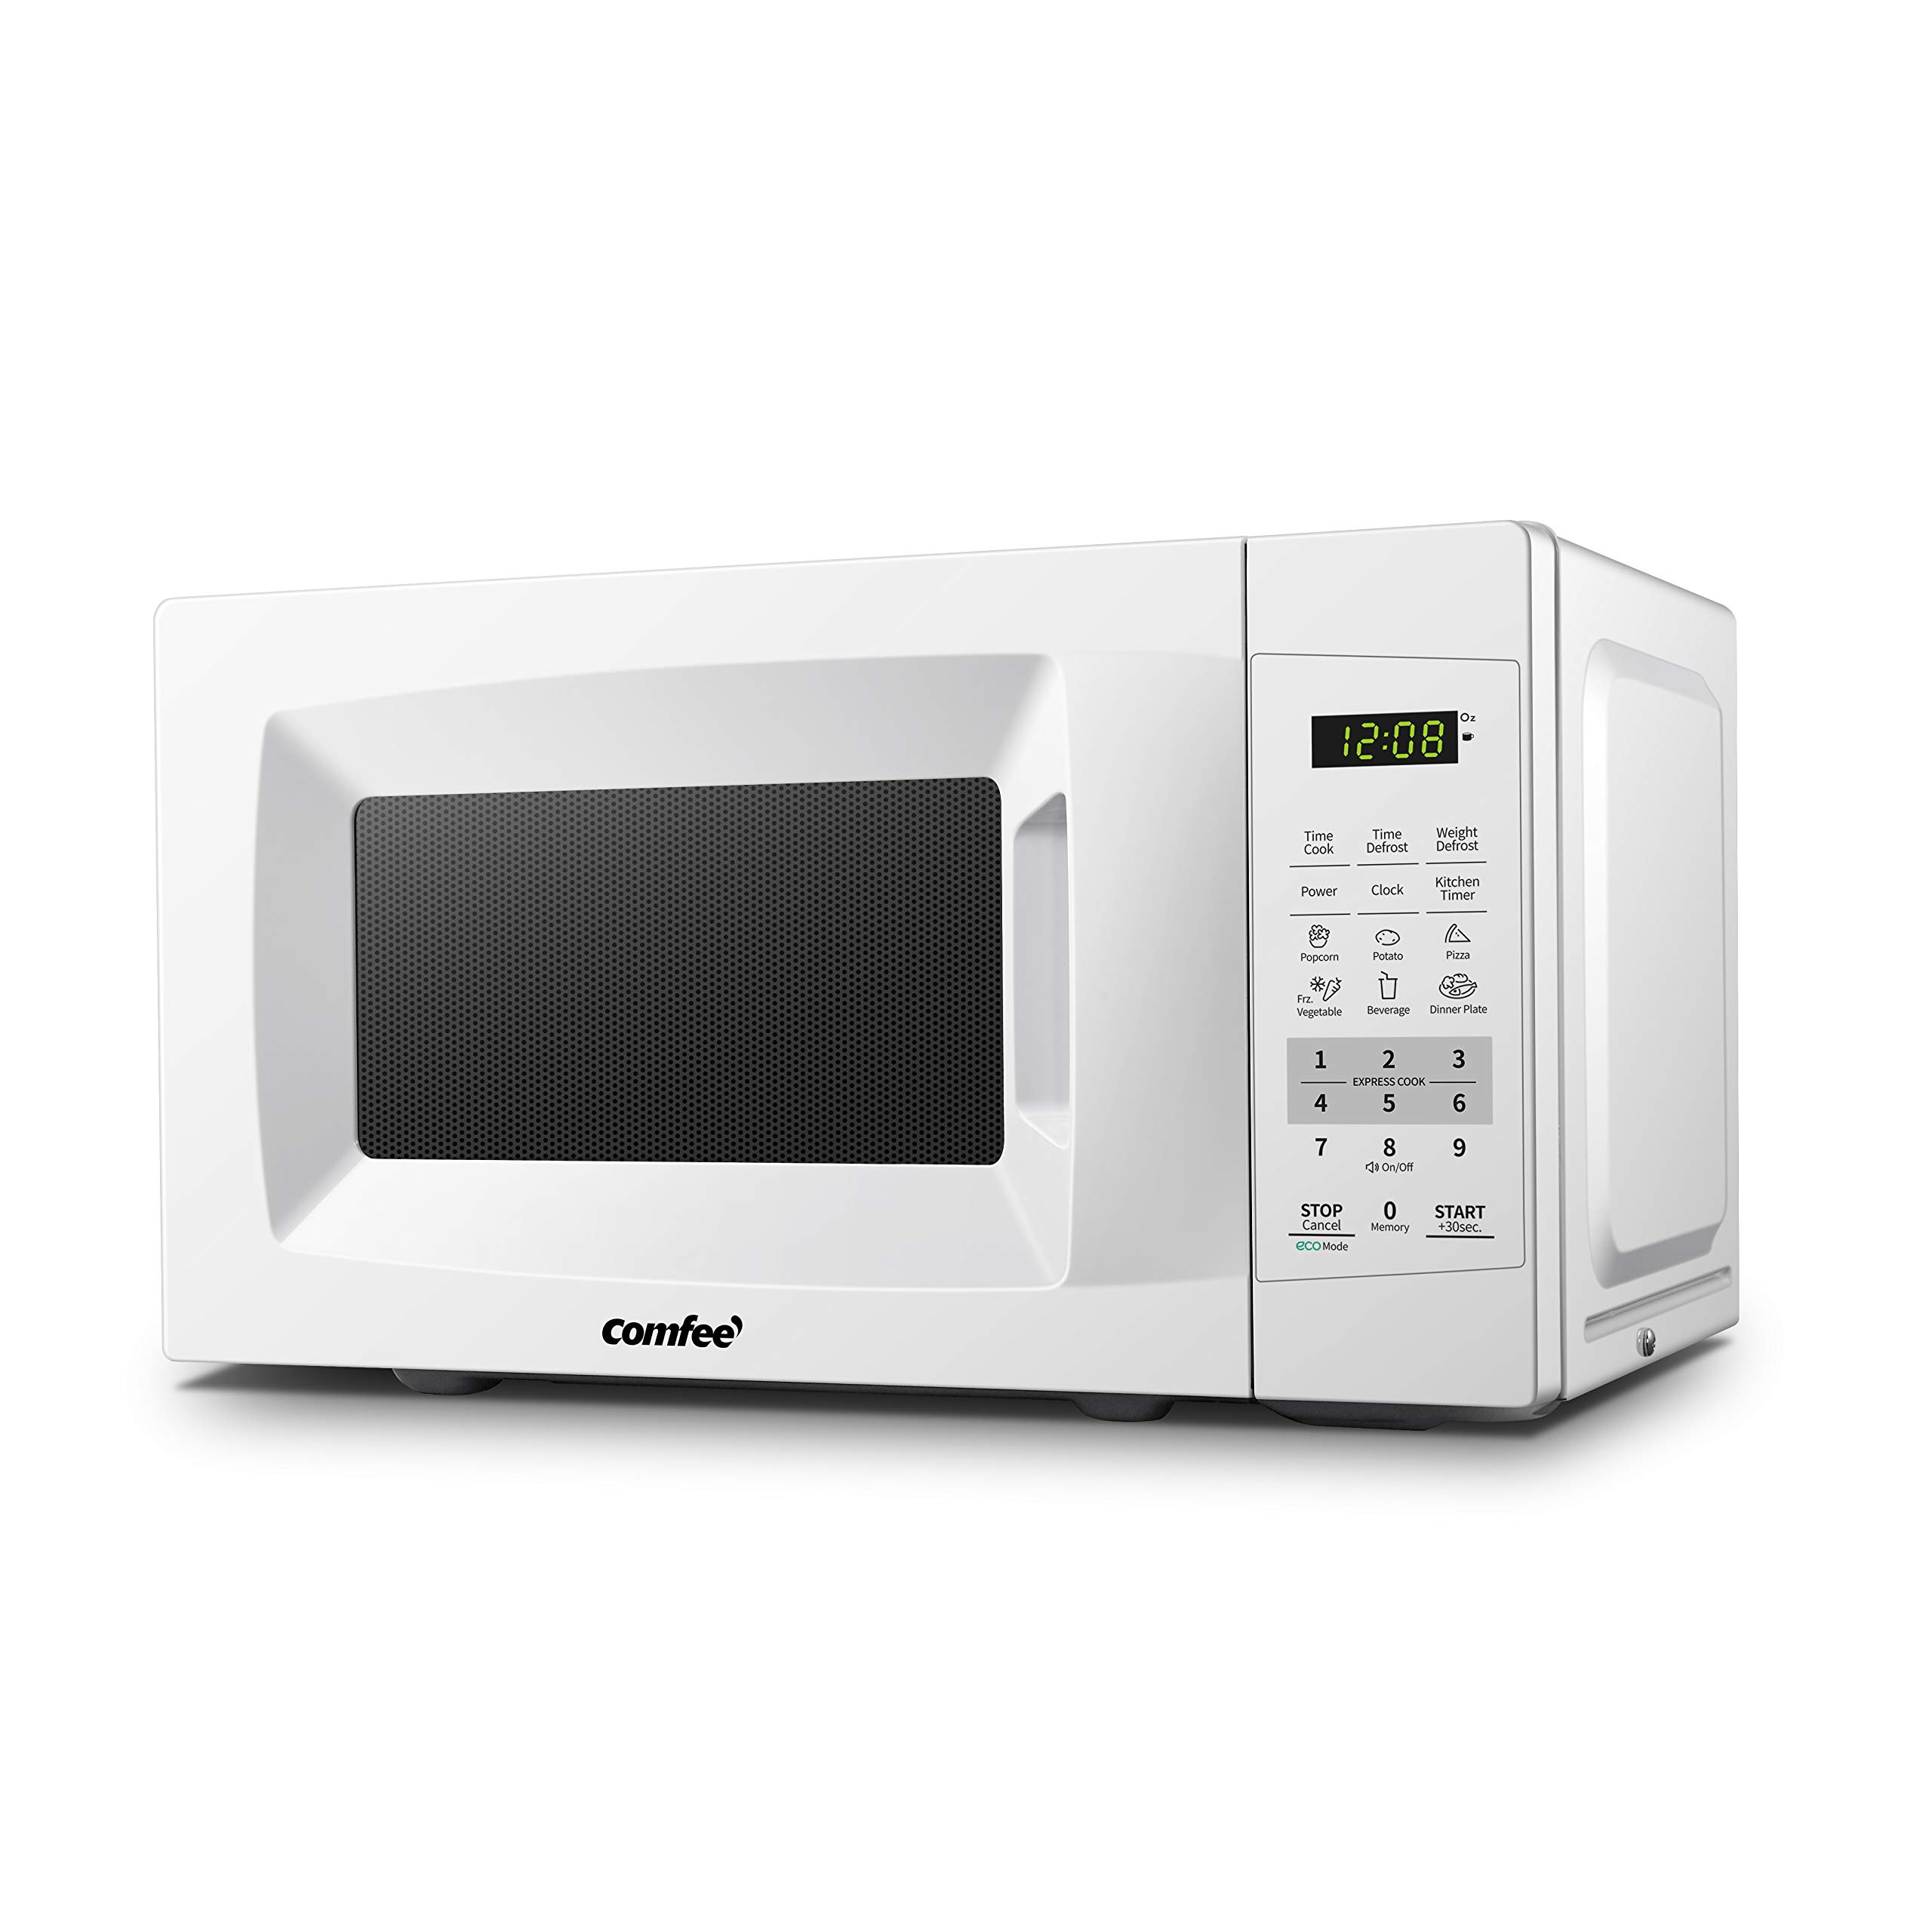 COMFEE' EM720CPL-PM Countertop Microwave Oven with Soun...